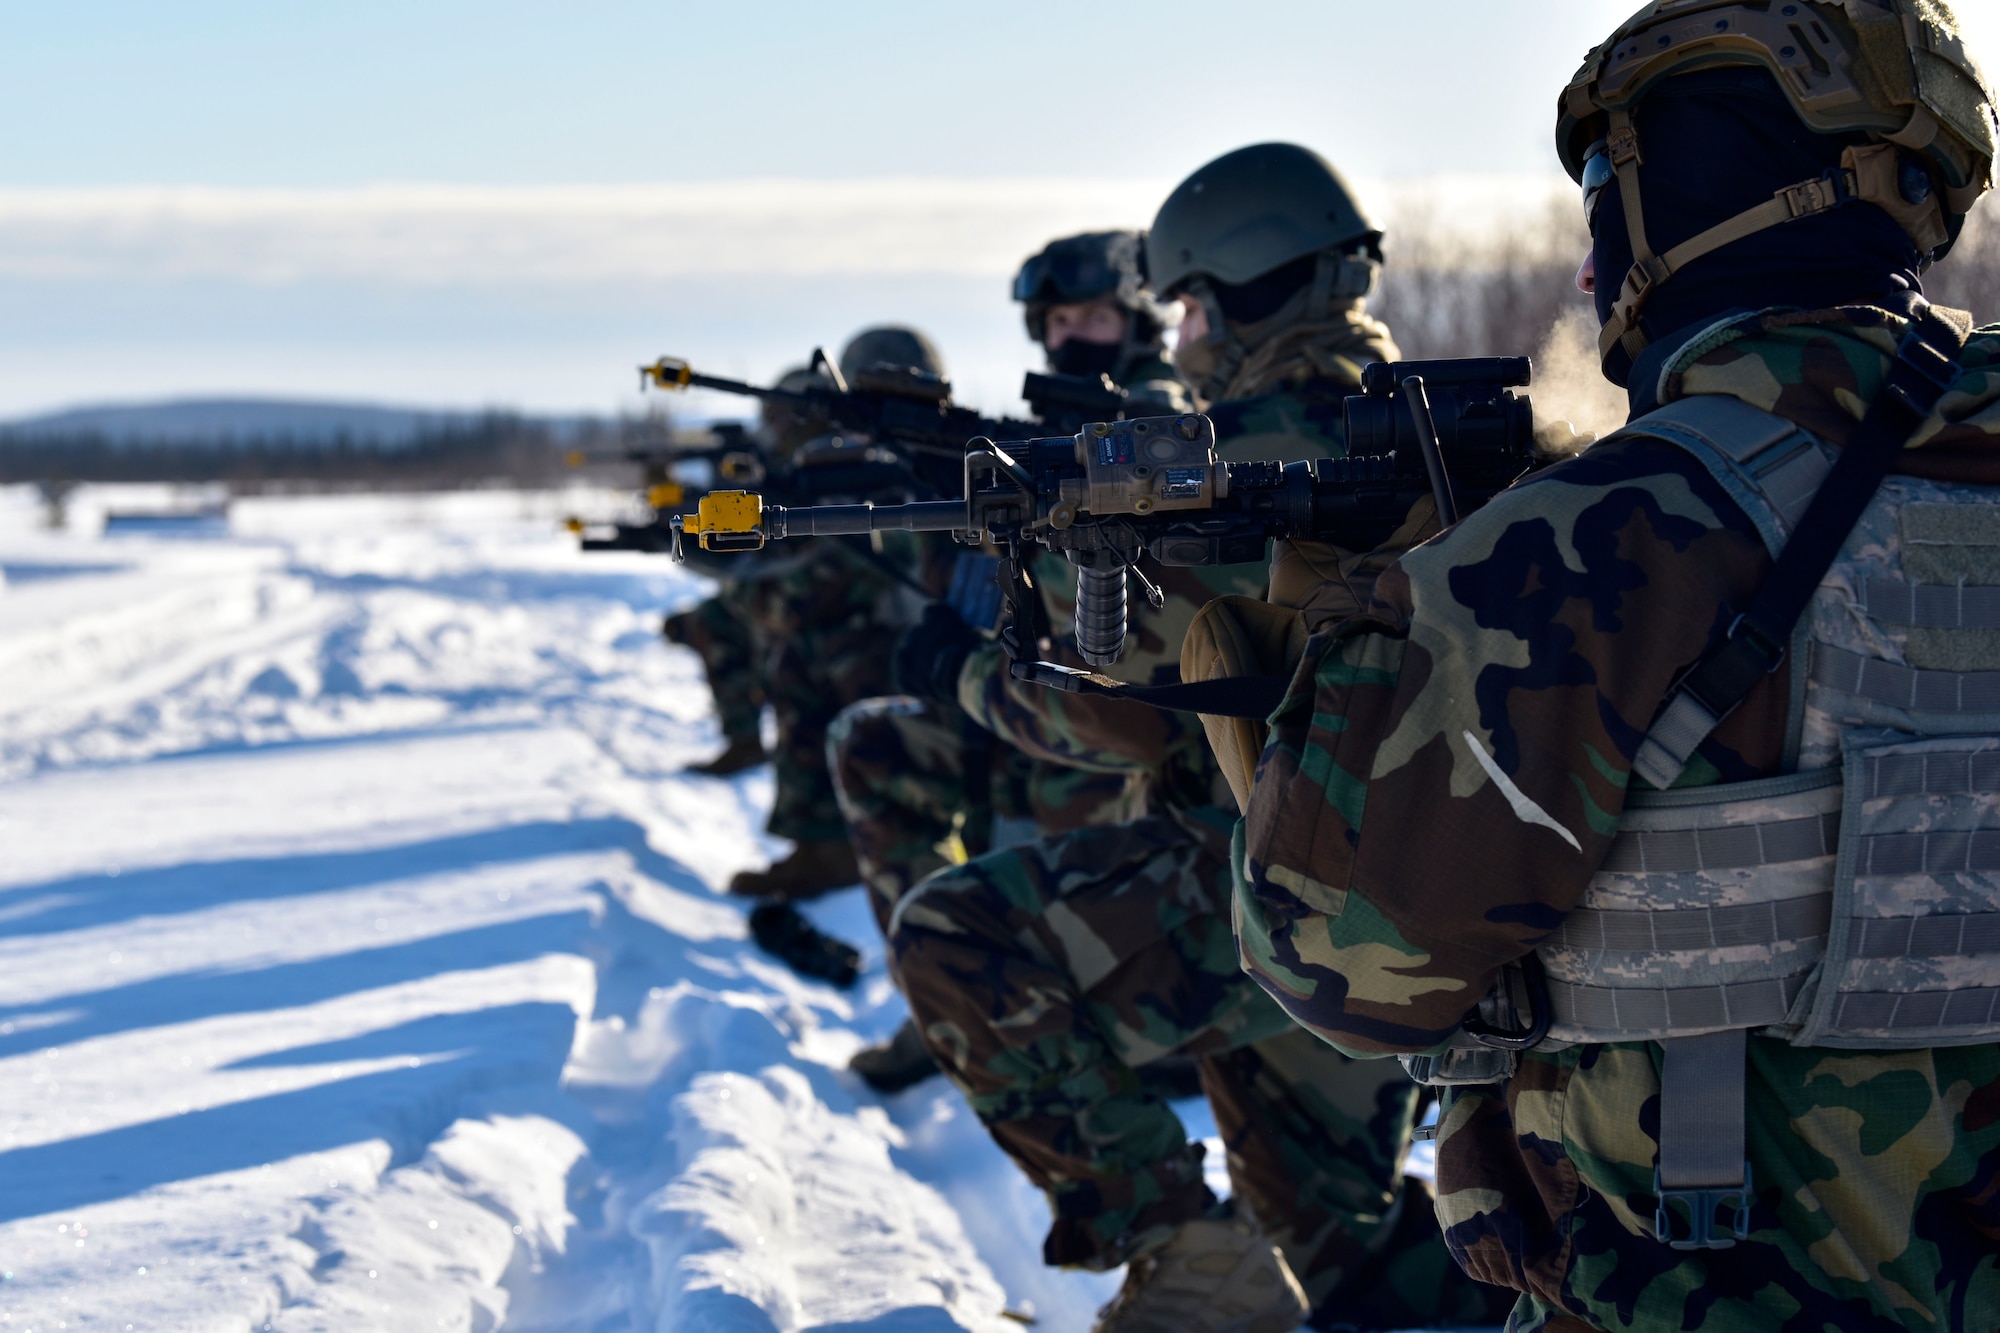 354th Security Forces Squadron defenders simulate an ambush during a medical evacuation exercise on Eielson Air Force Base, Alaska, Feb. 26, 2020. The defender’s M4 carbines are equipped with a blank-firing adaptor to simulate the sound of a gunshot without any projectiles. (U.S. Air Force photo by Senior Airman Beaux Hebert)